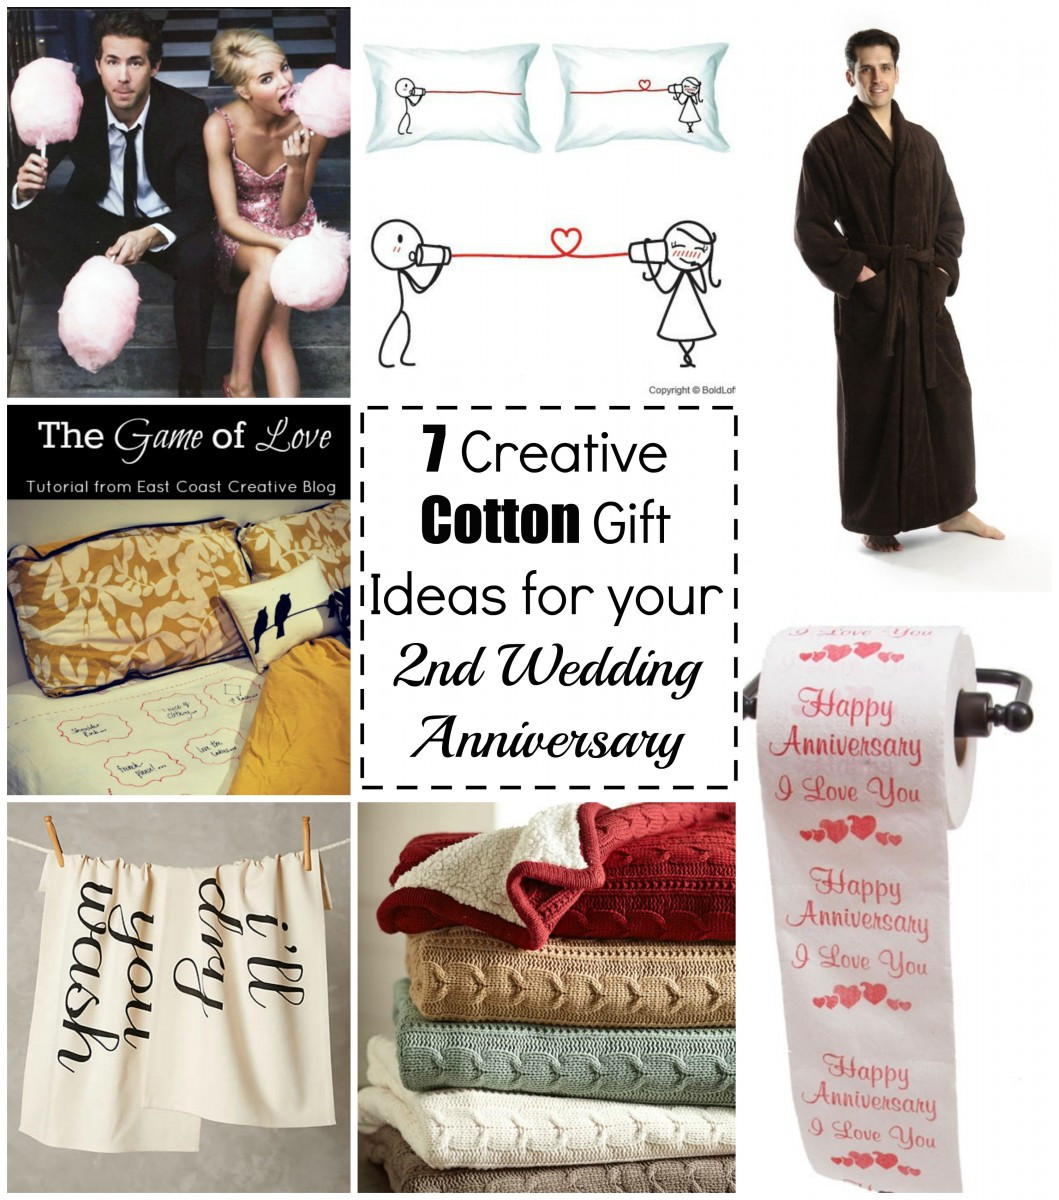 Second Marriage Wedding Gifts
 7 Cotton Gift Ideas for your 2nd Wedding Anniversary